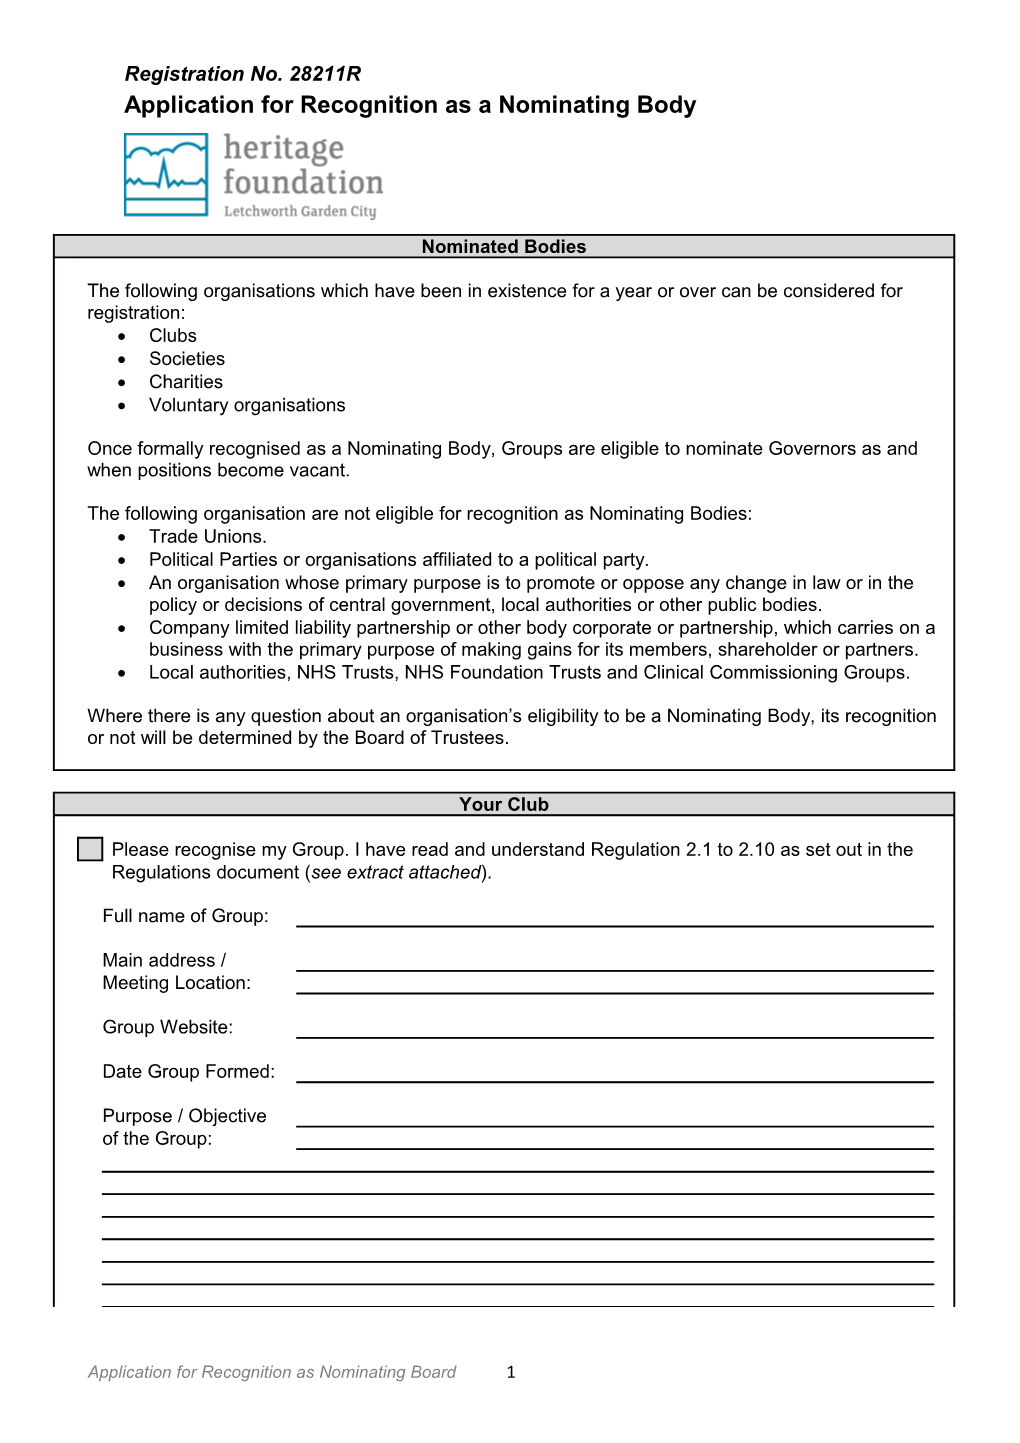 Application for Recognition As Nominating Board 1